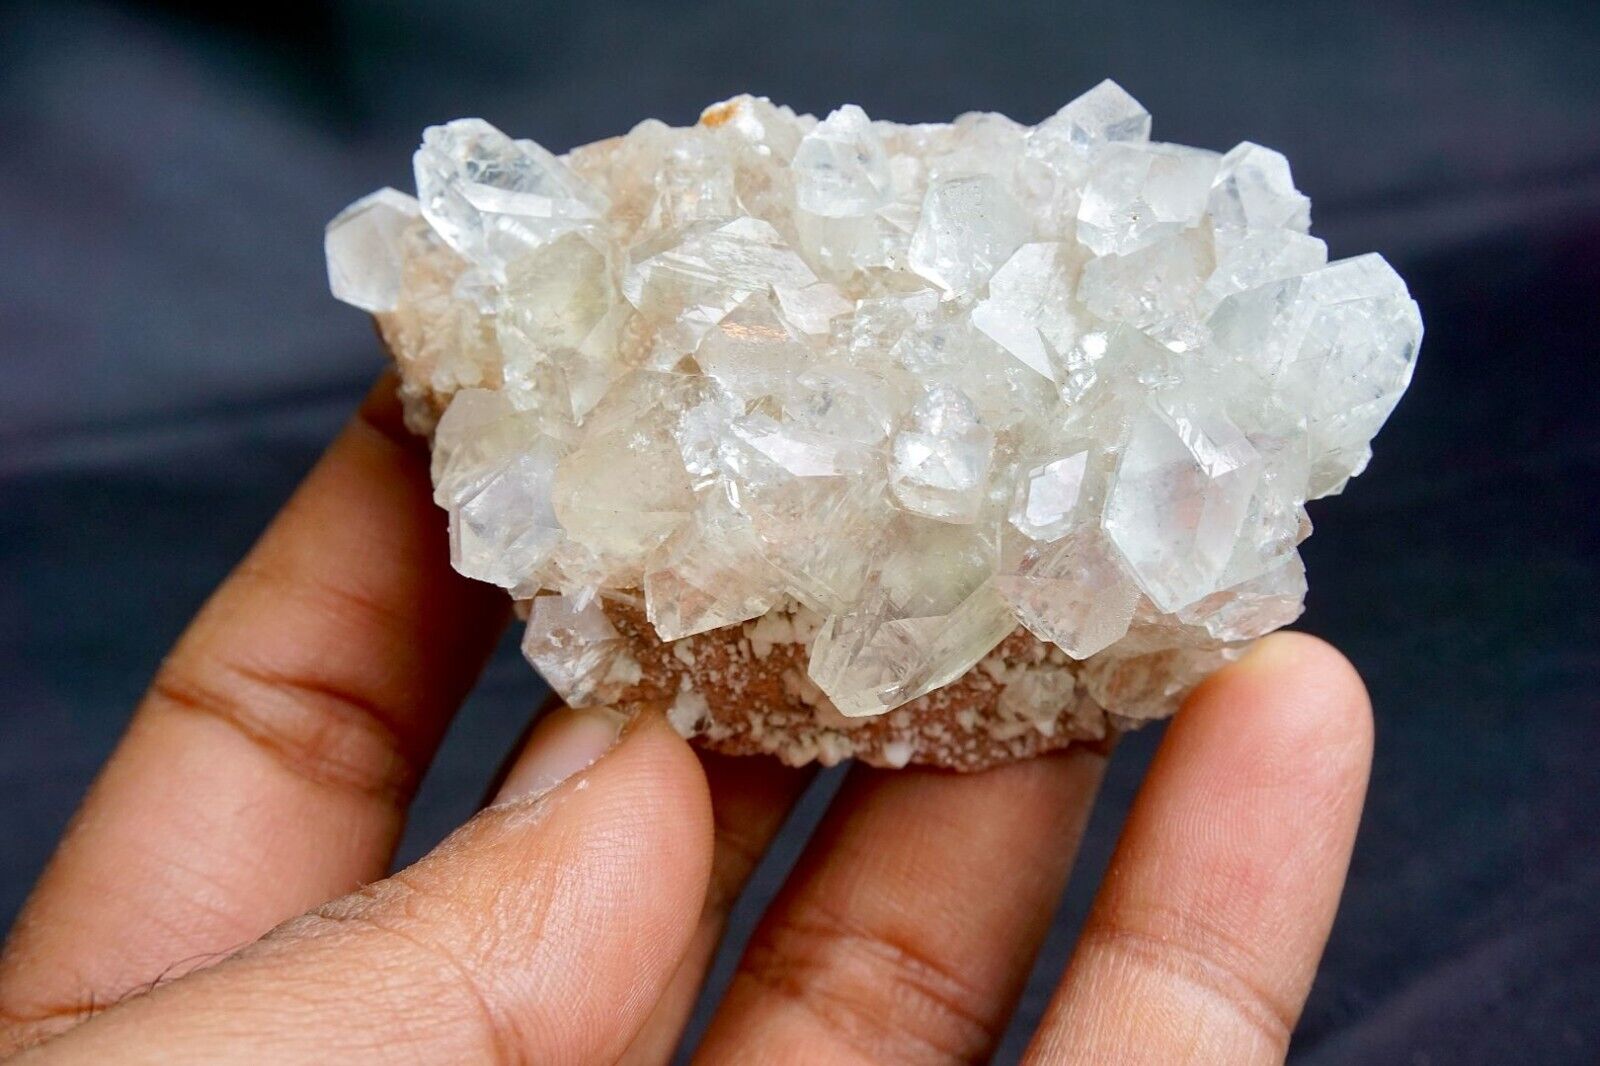 Clear Shiny Apophyllite crystals on Chalcedony *High Quality* - ES-ZM10005